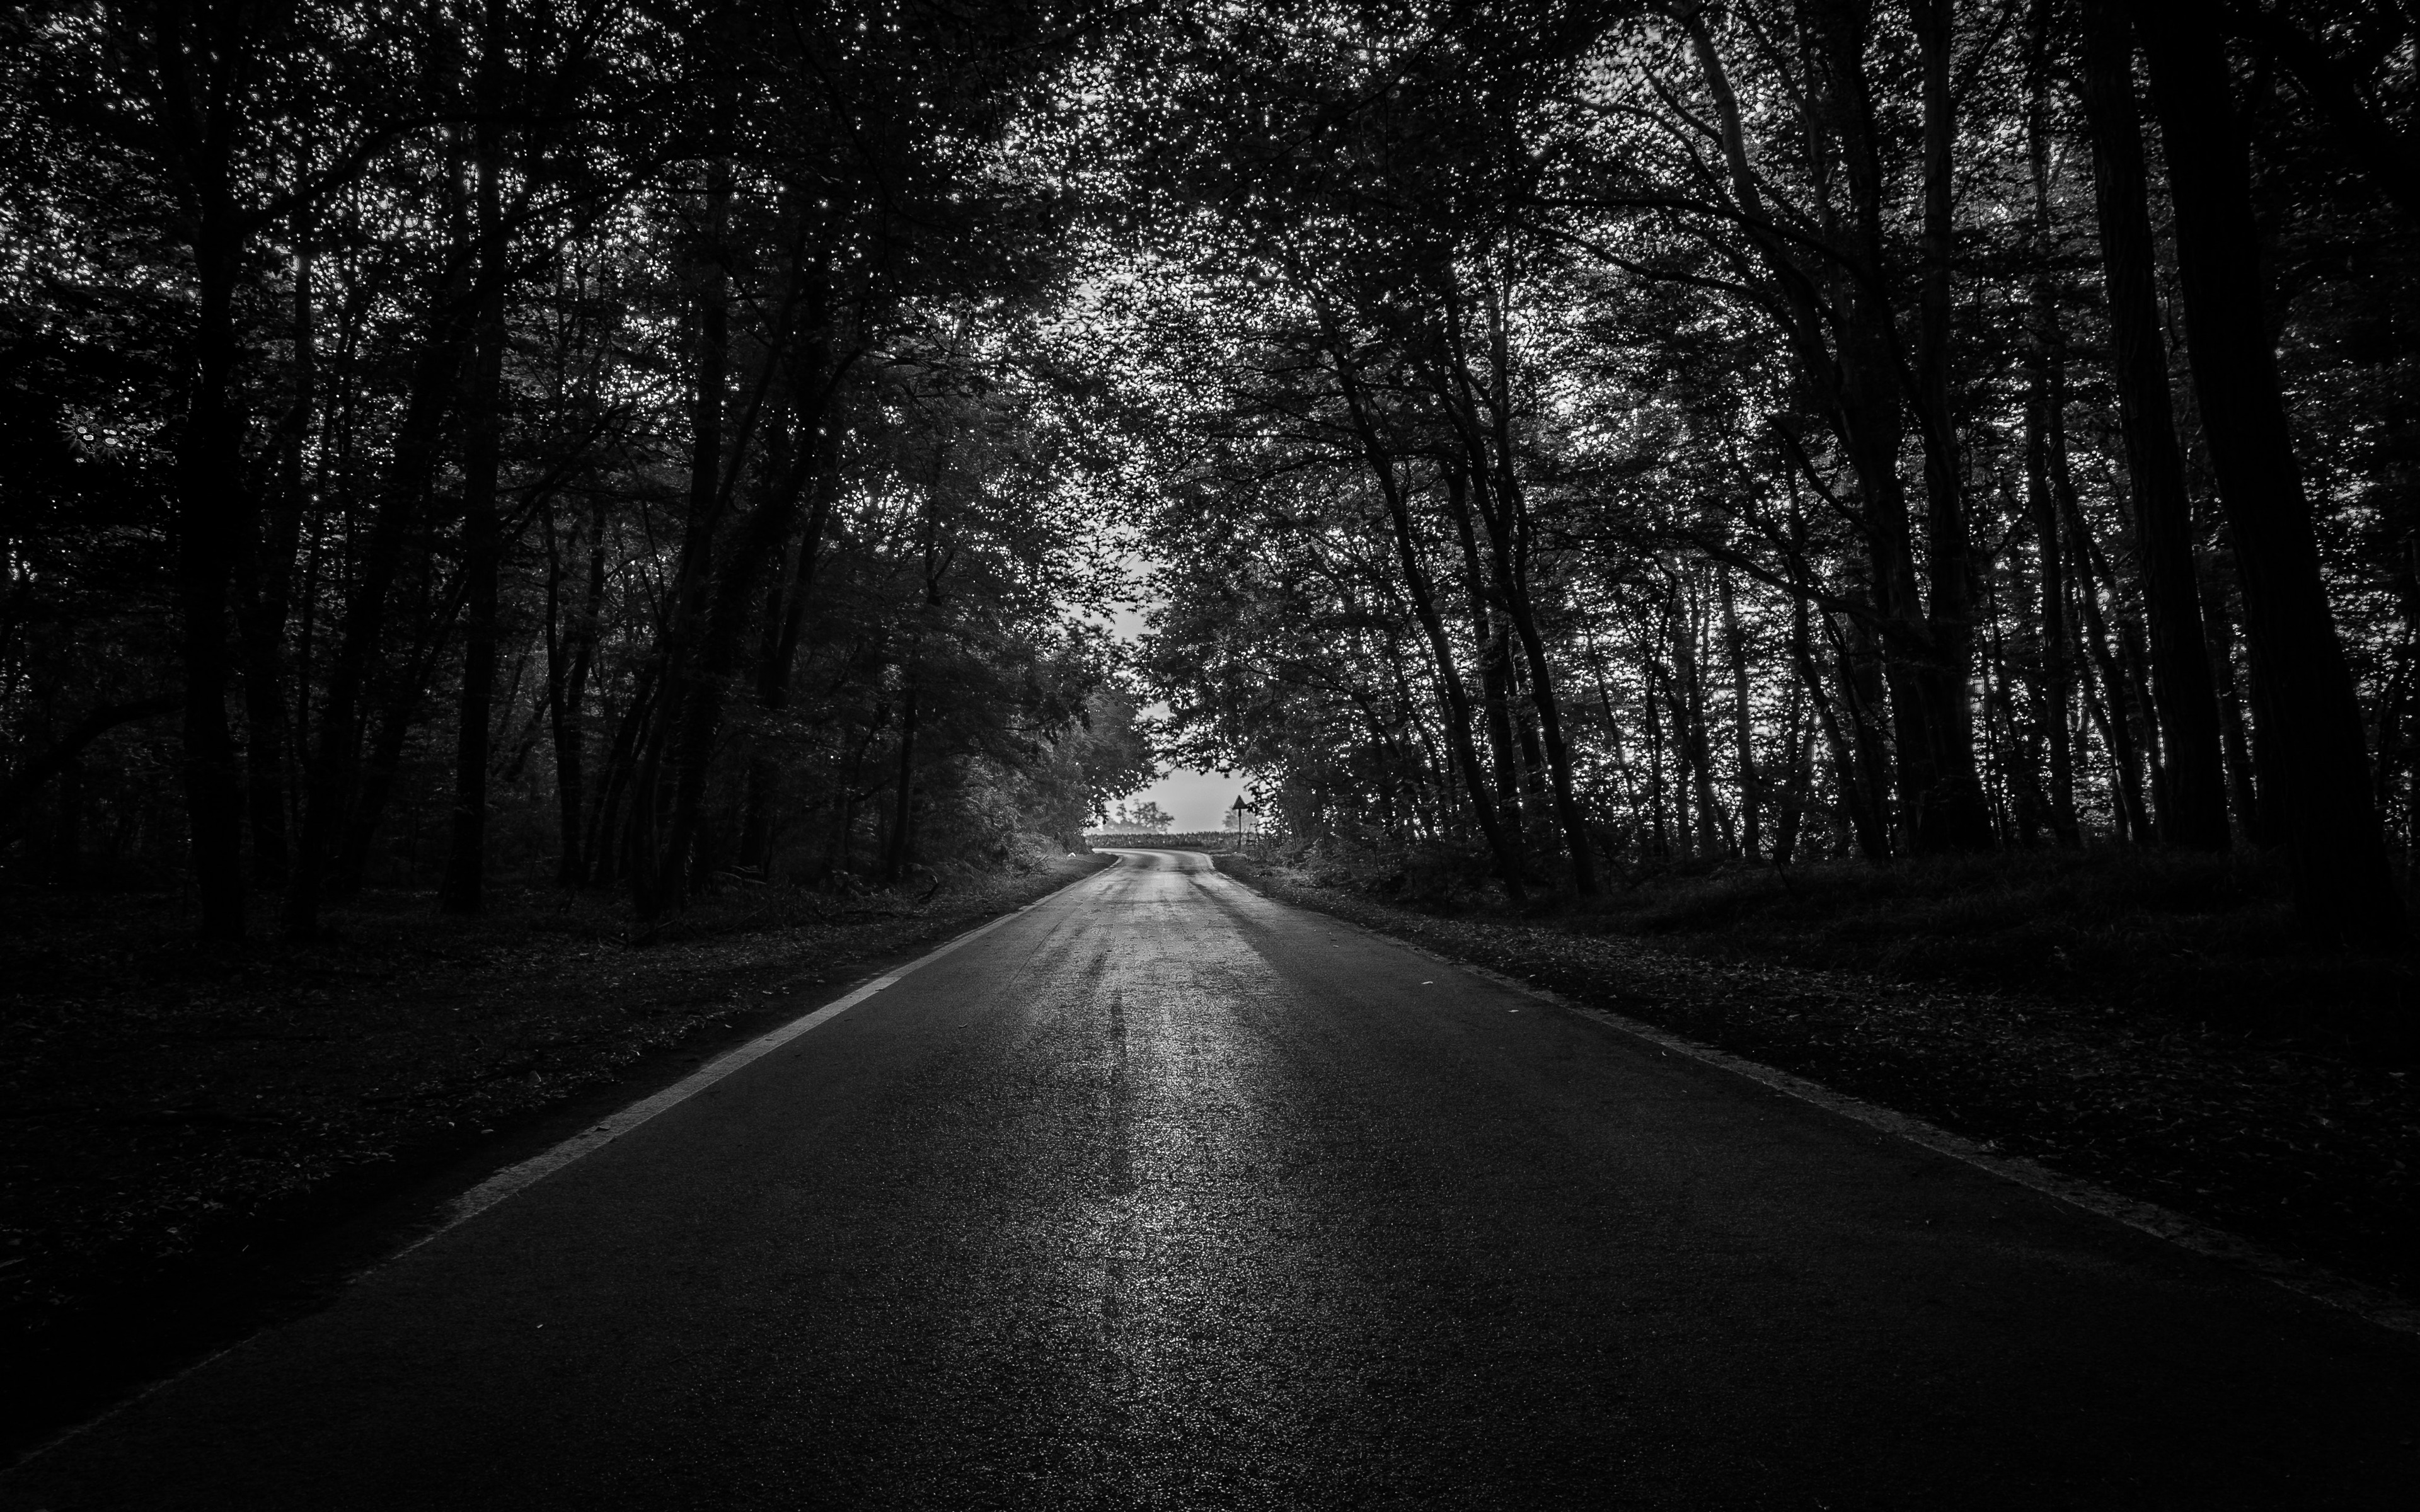 Free Download Download Wallpaper 3840x2400 Road Trees Bw Dark Forest 4k 3840x2400 For Your Desktop Mobile Tablet Explore 28 Dark Road Wallpapers Dark Road Wallpapers Beautiful Road Wallpaper Road Runner Wallpaper